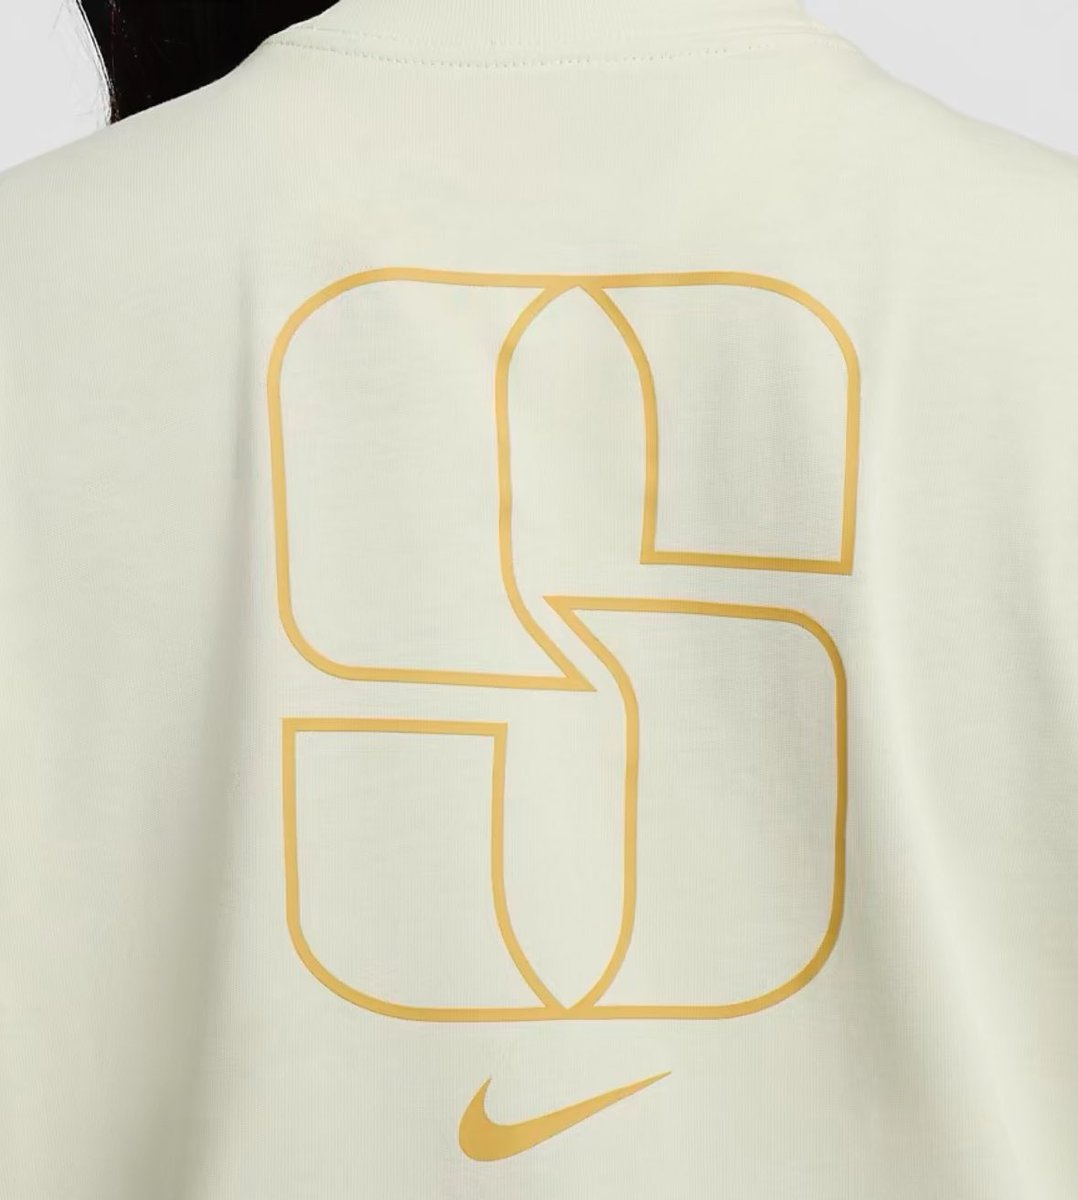 Another Nike By You @sabrina_i20 1s I just designed and ordered with semi matching t-shirt. Best shoes right now.